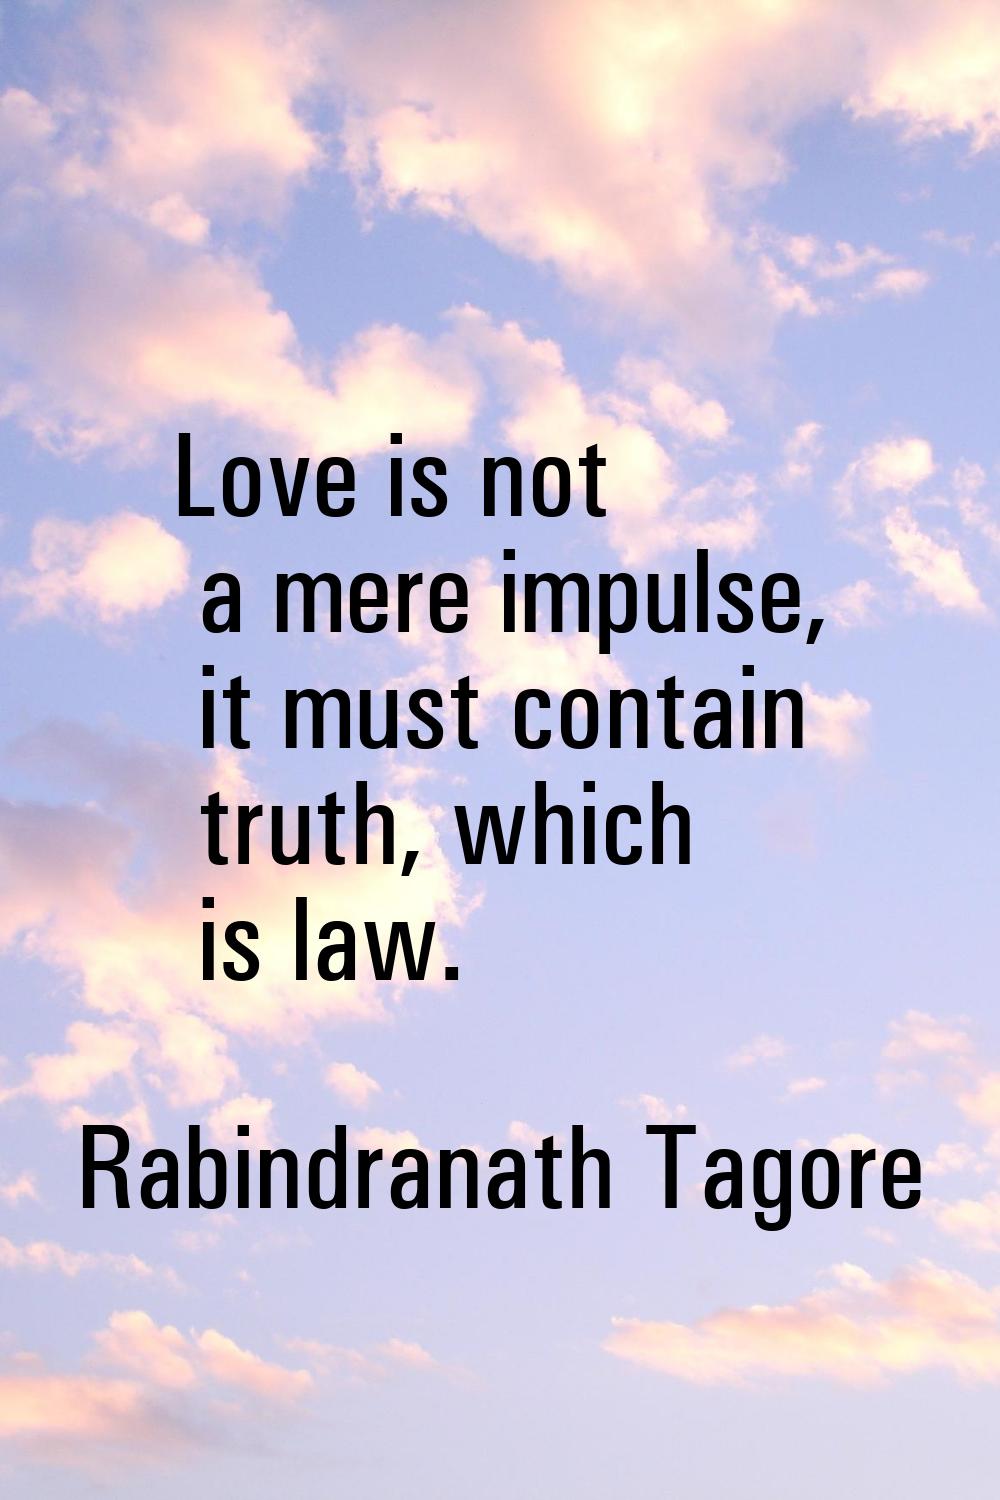 Love is not a mere impulse, it must contain truth, which is law.